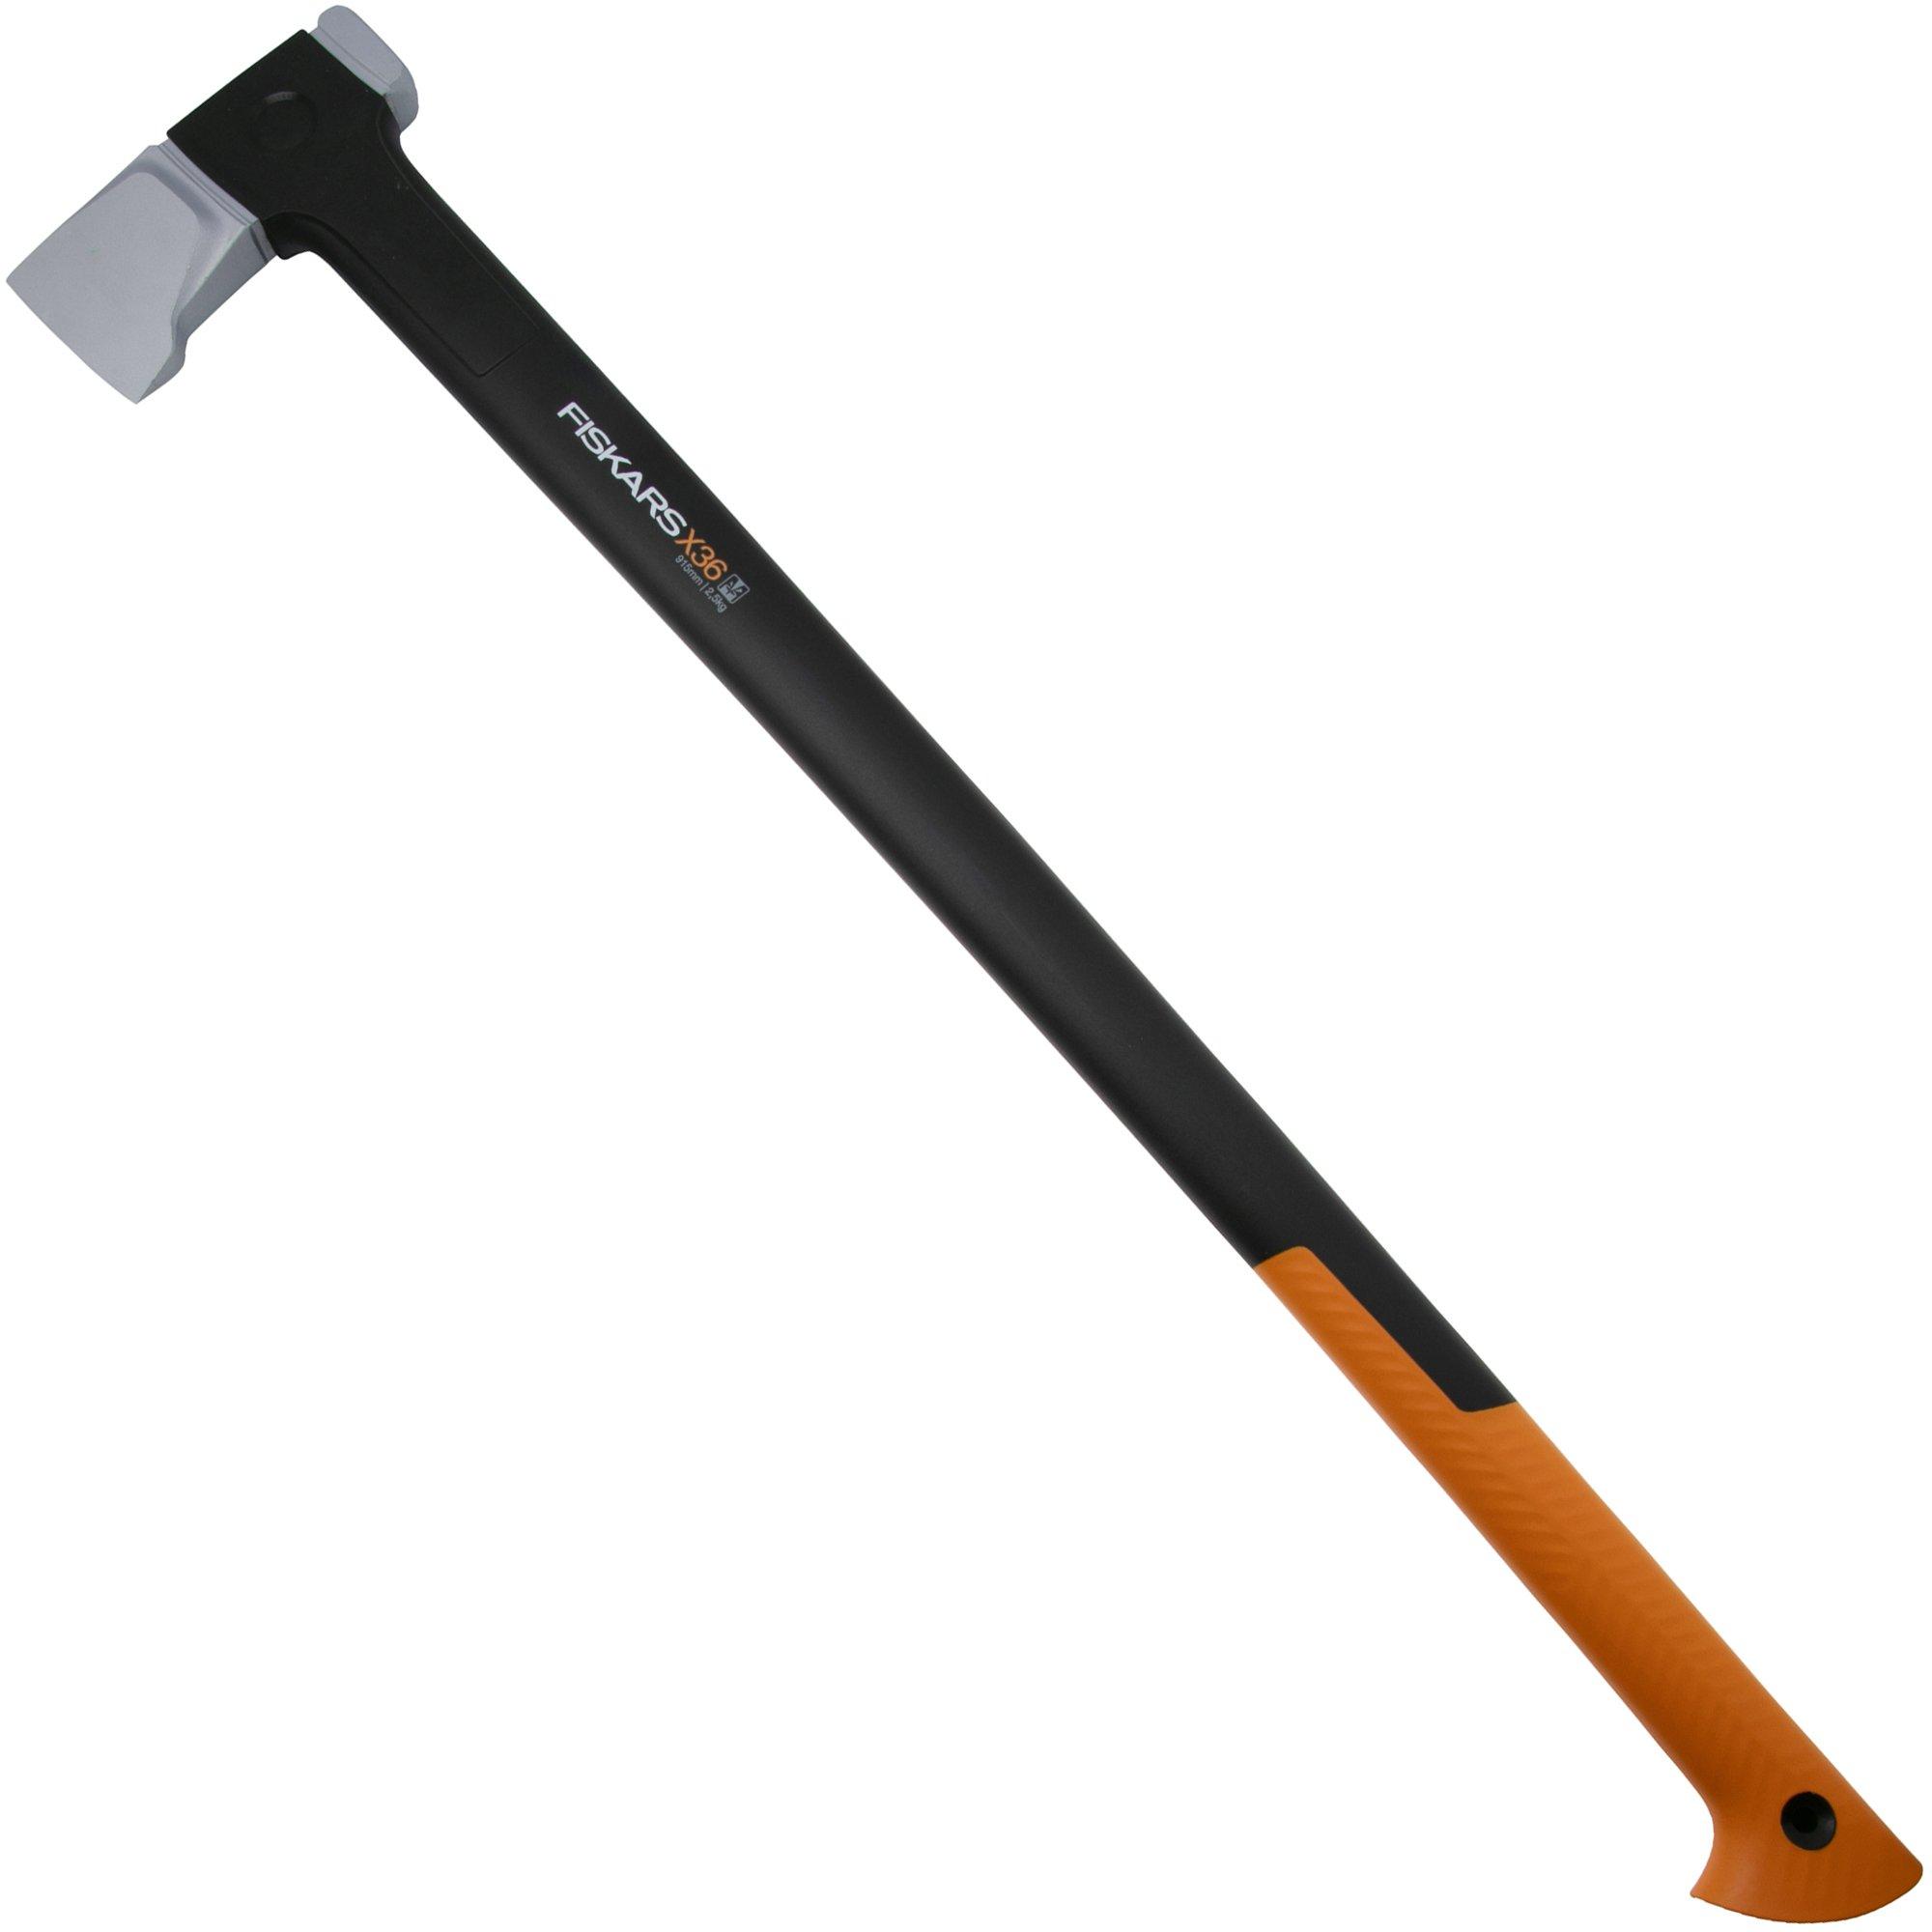 The new and improved Fiskars X series: the 5th generation of Fiskars axes